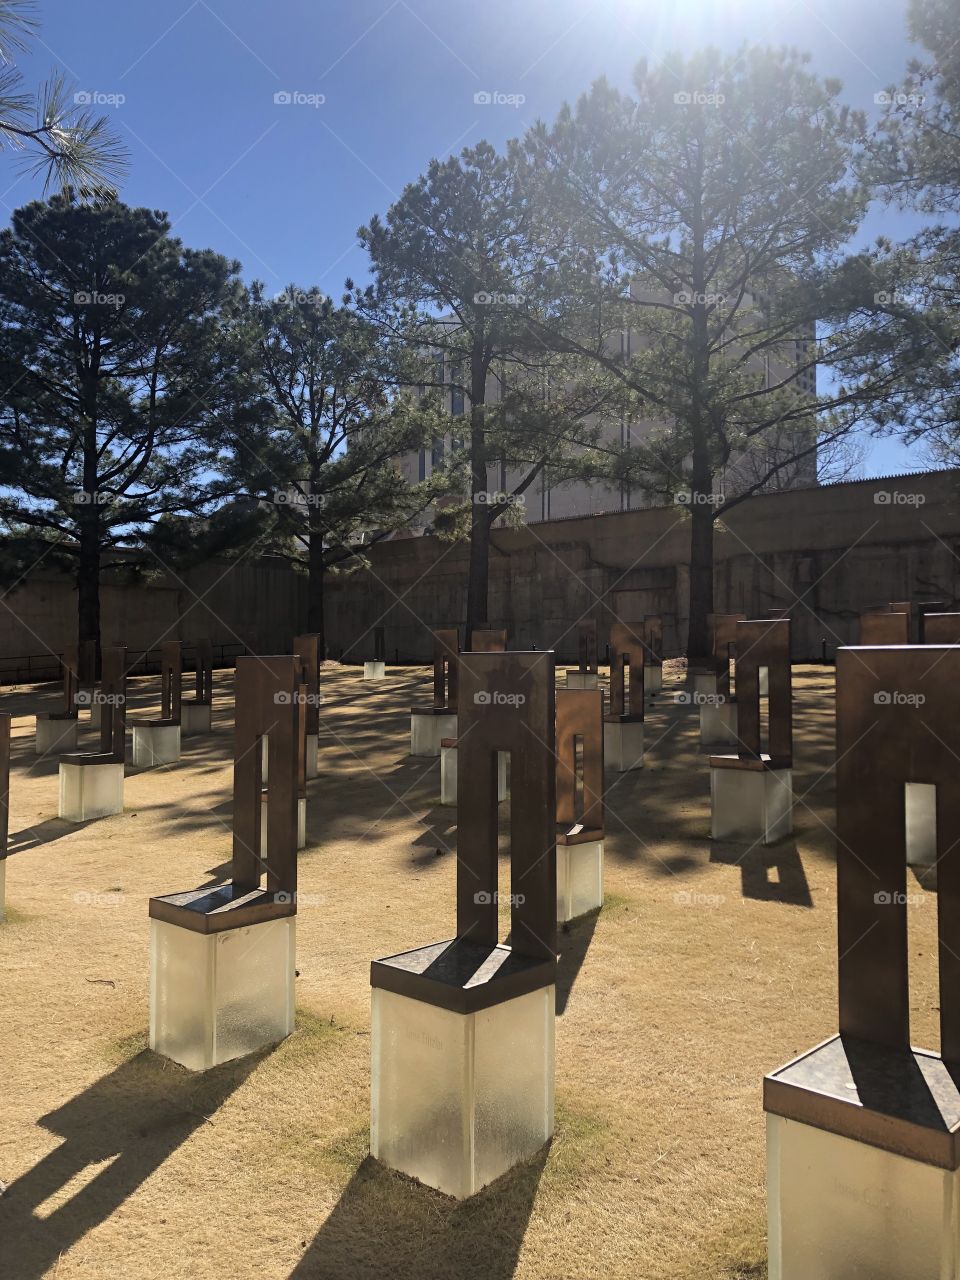 Remember those died that fateful day- Oklahoma City Memorial 